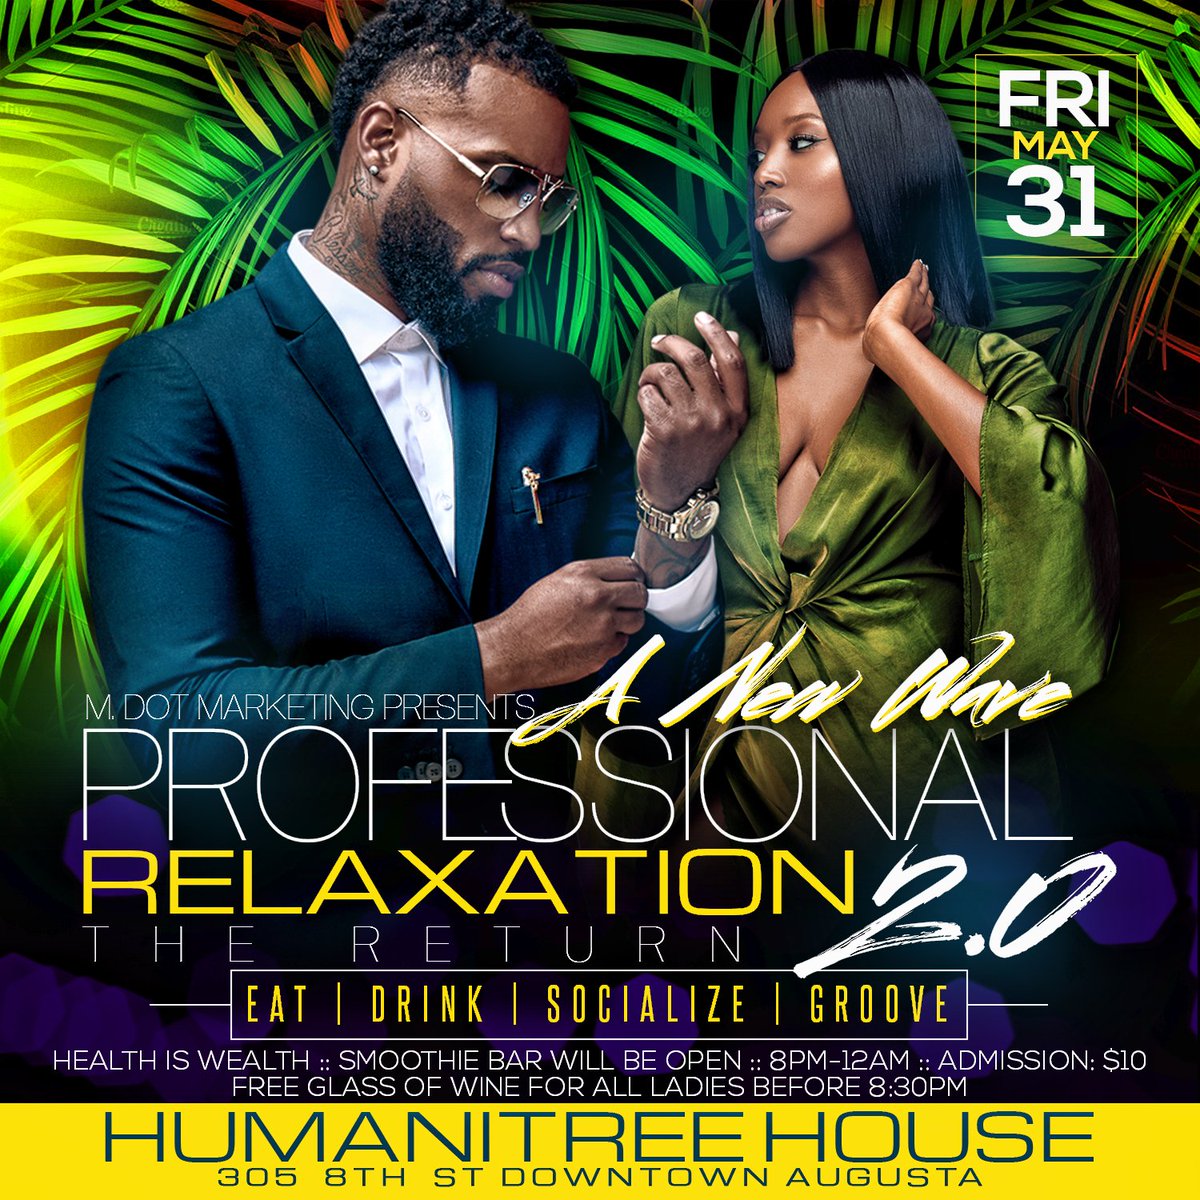 Fri May 31st slide down to @HumanitreeHouse on 8th St downtown #Augusta for #ProfessionalRelaxation 2.0 with @MDOT_4daWin & @DJSwagg706 & me!! Come unwind with some wine!!